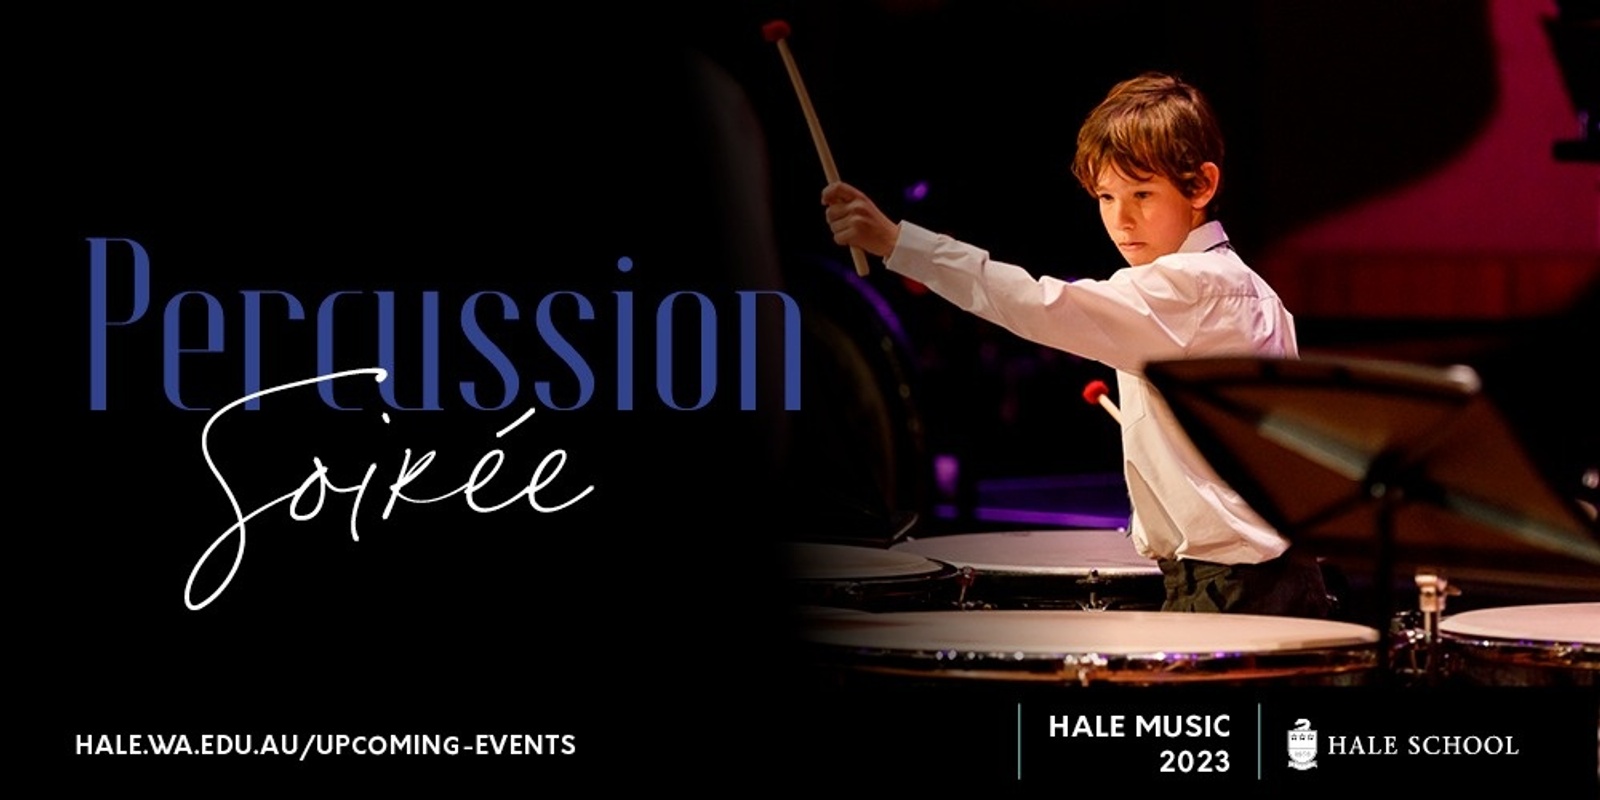 Banner image for Percussion Soiree 2023